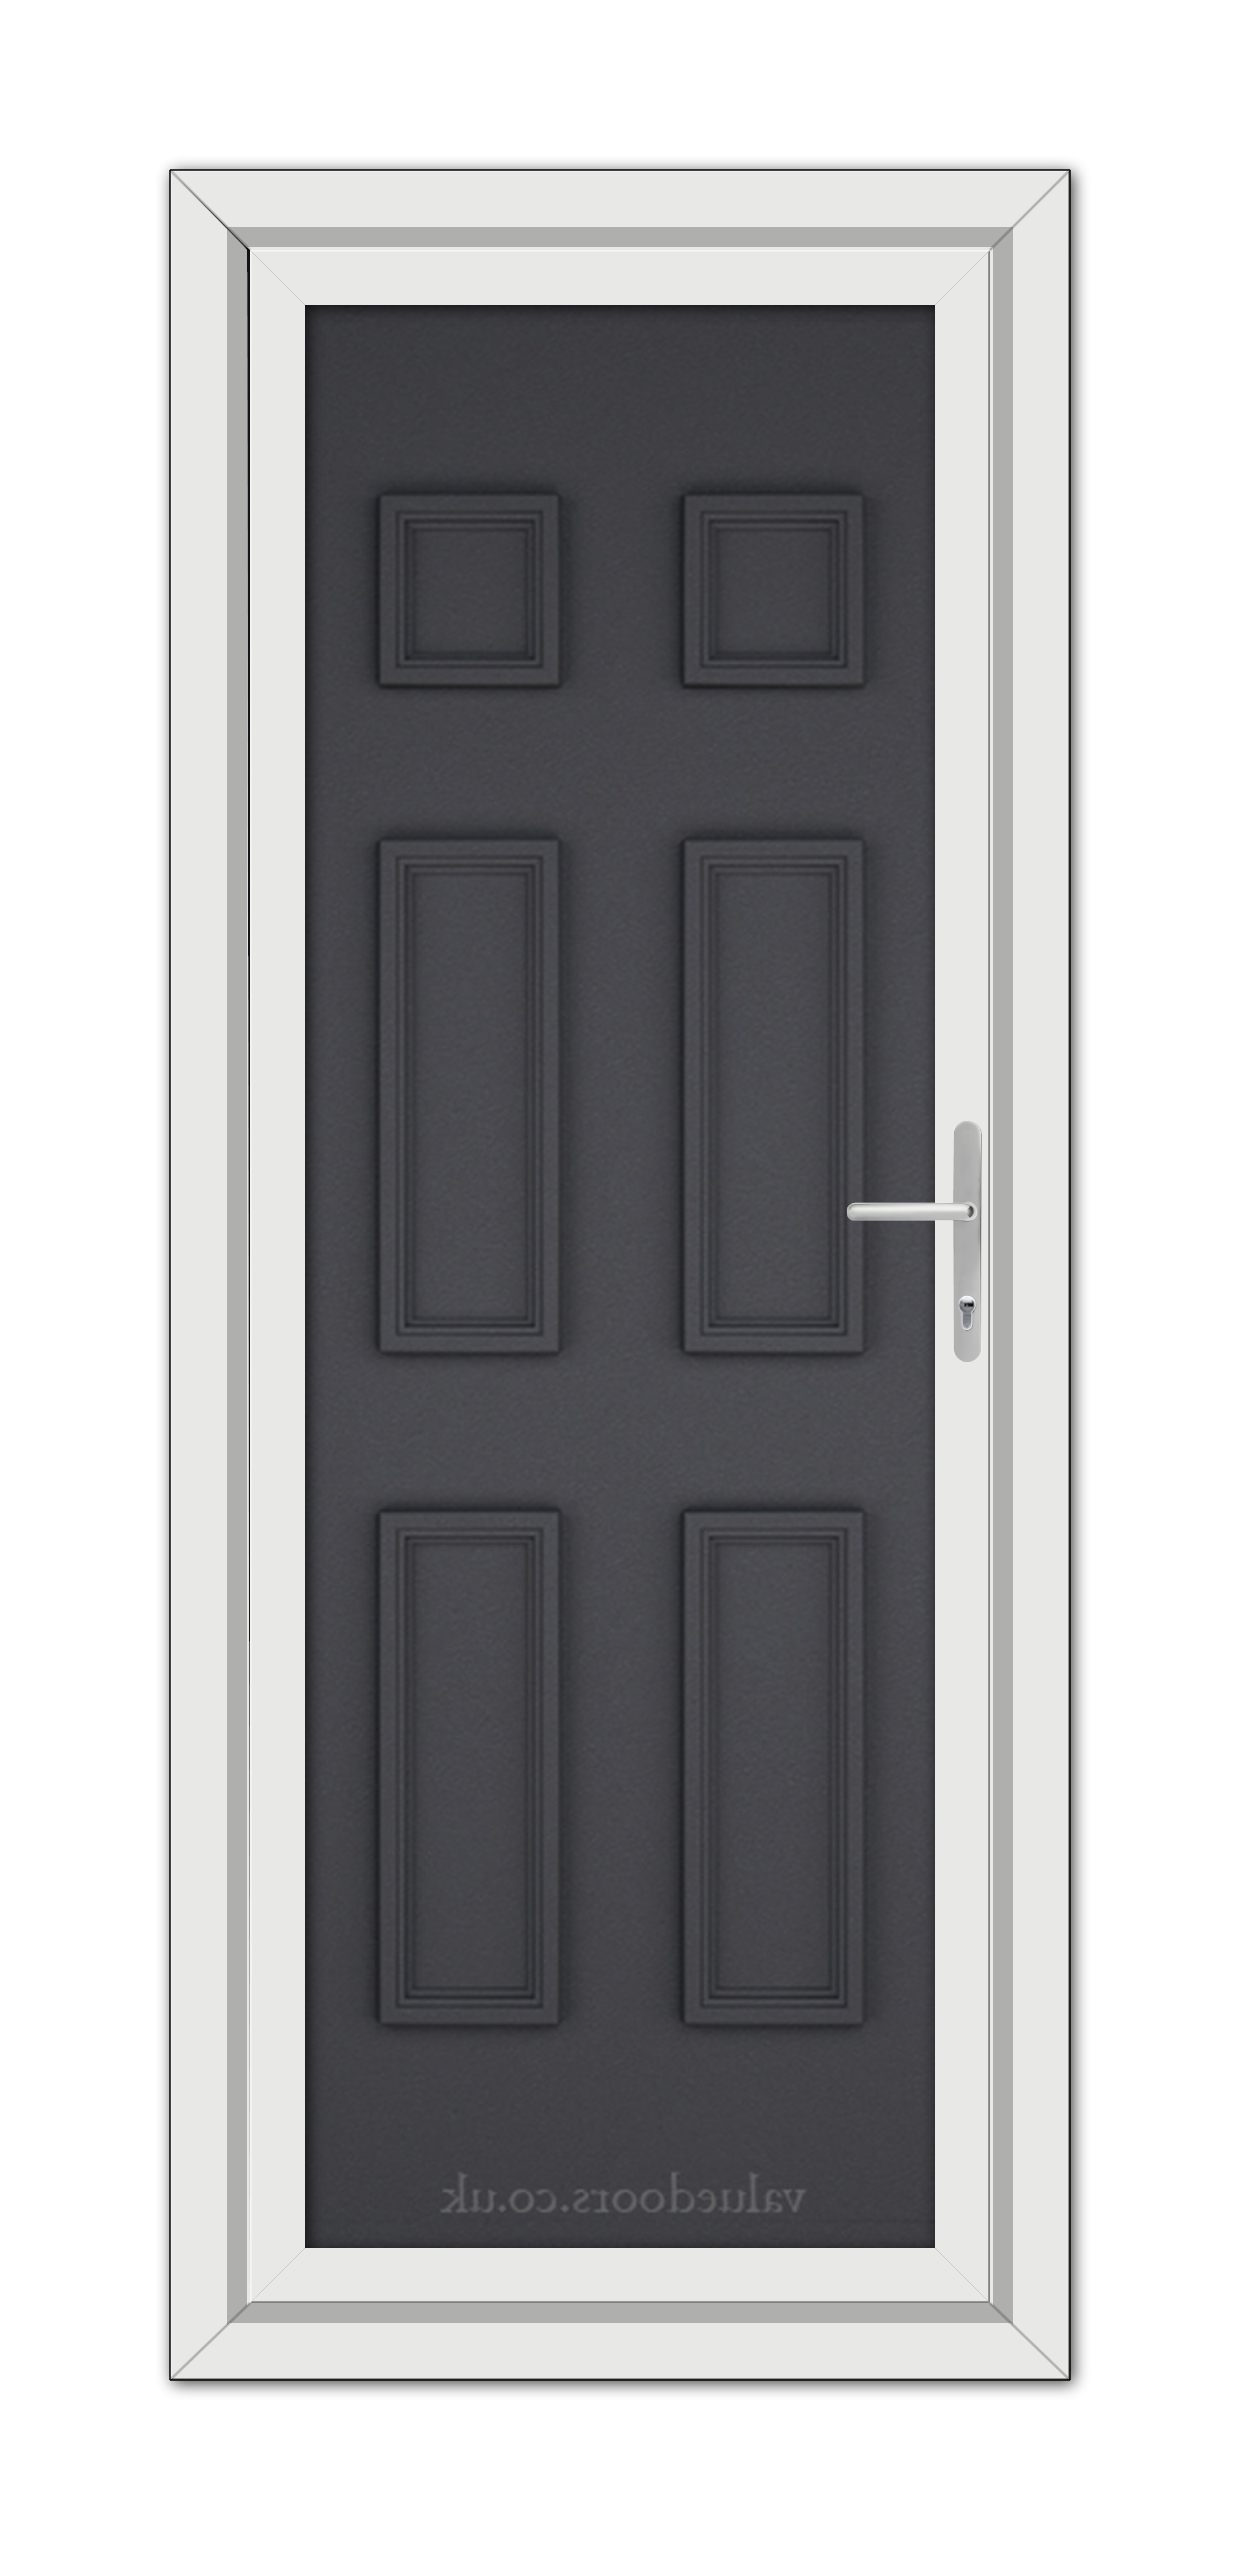 A modern Grey Grained Windsor Solid uPVC door with six panels and a silver handle, framed in a white door frame, viewed from the front.